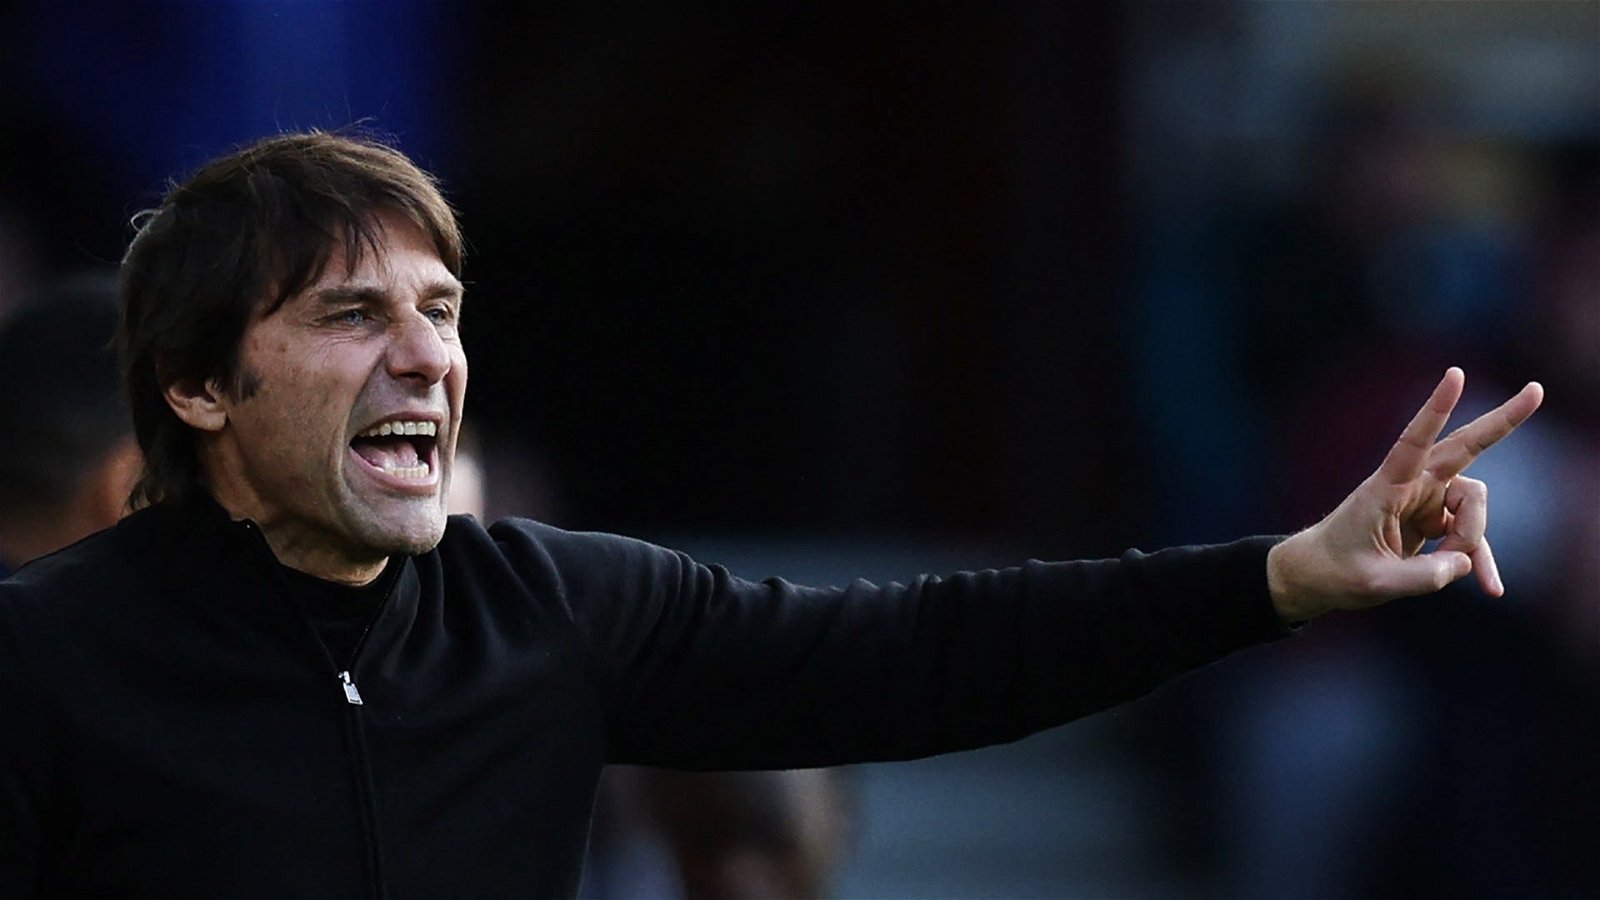 OFFICIAL: Antonio Conte sacked by Tottenham Hotspur with immediate effect